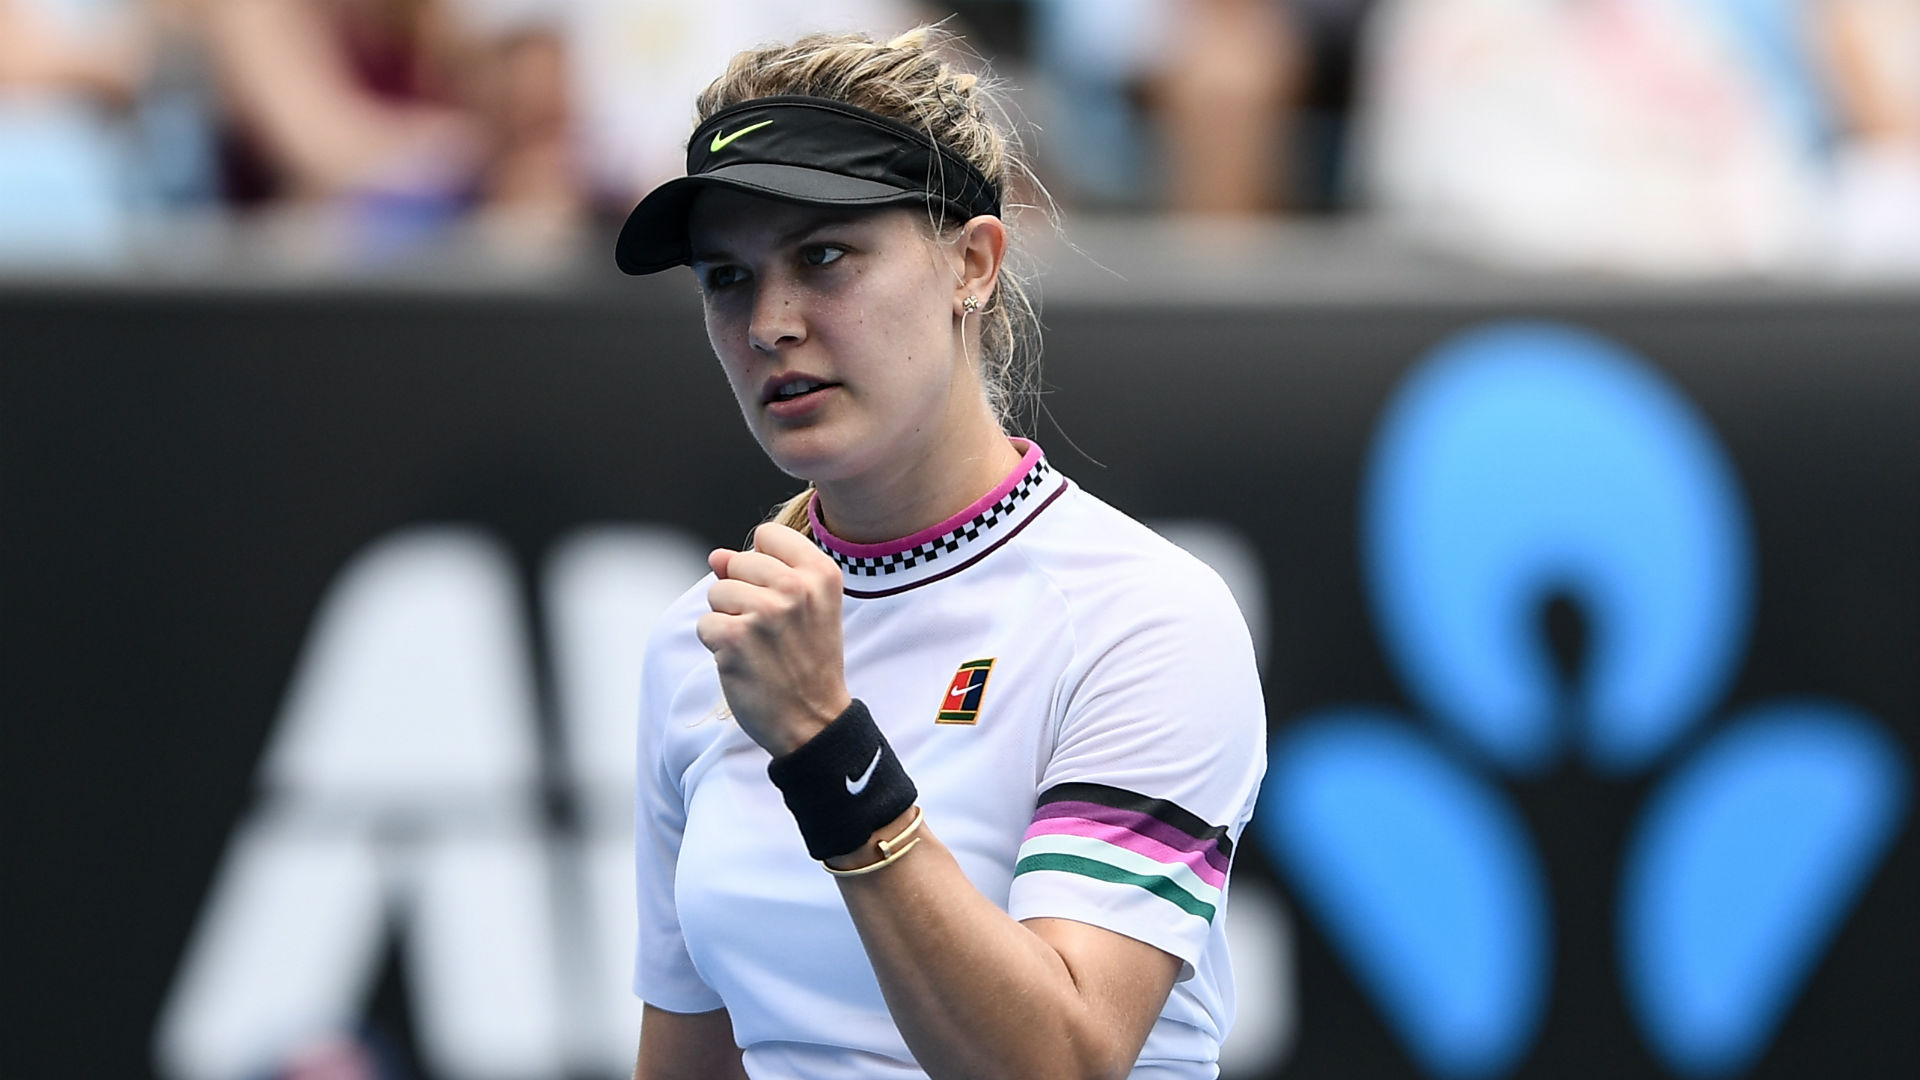 Eugenie Bouchard's reward for beating Peng Shuai is a second-round meeting with Serena Williams at the Australian Open, and she's excited.